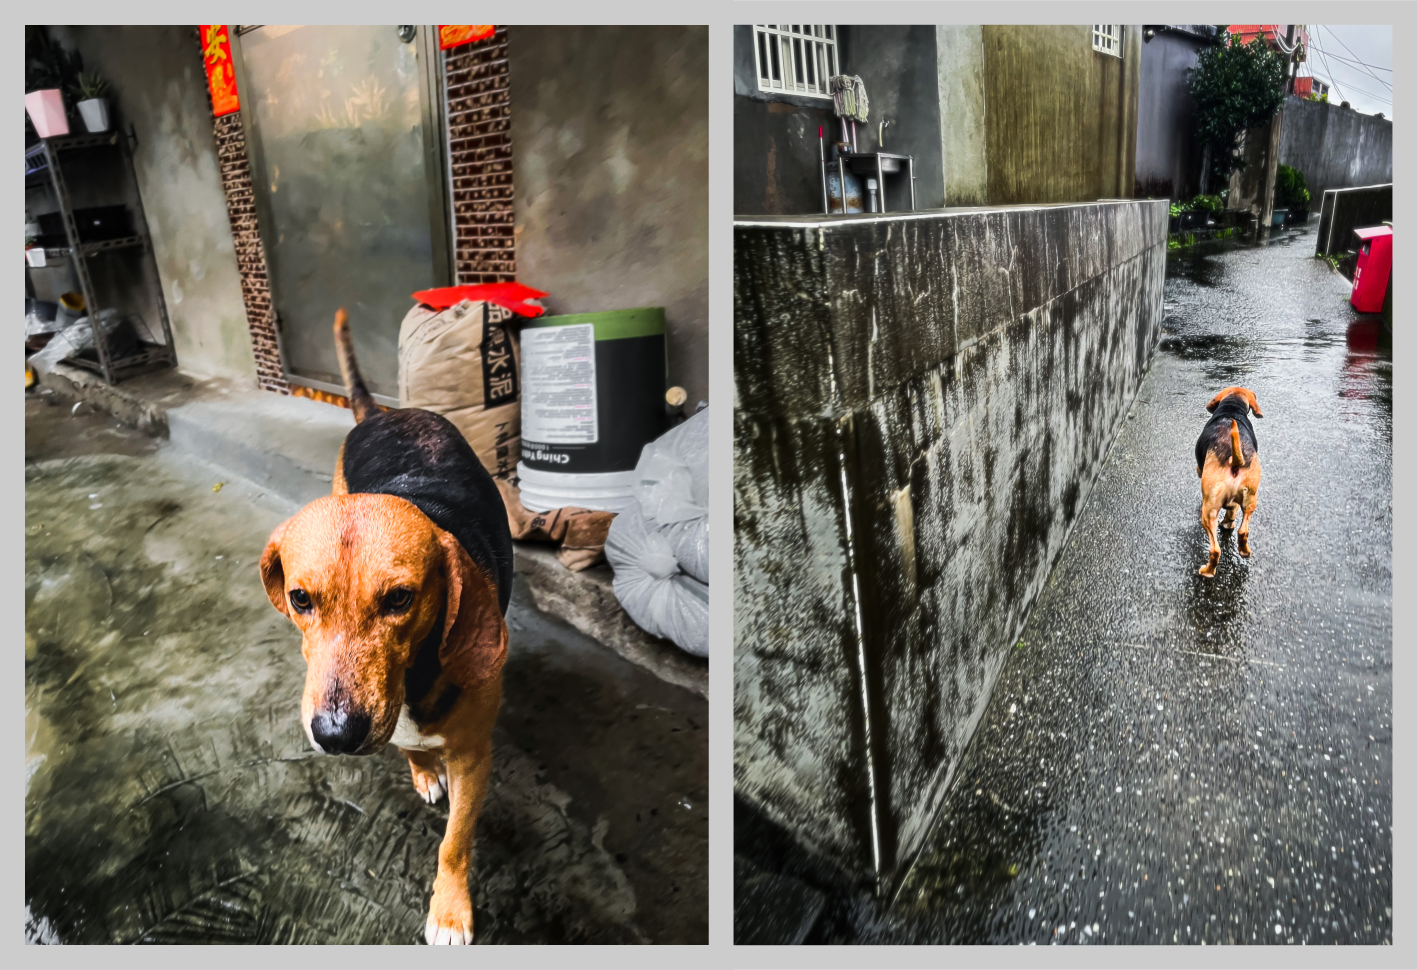 A beagle wanders the rainy streets on the mountain above Jiufen Old Street